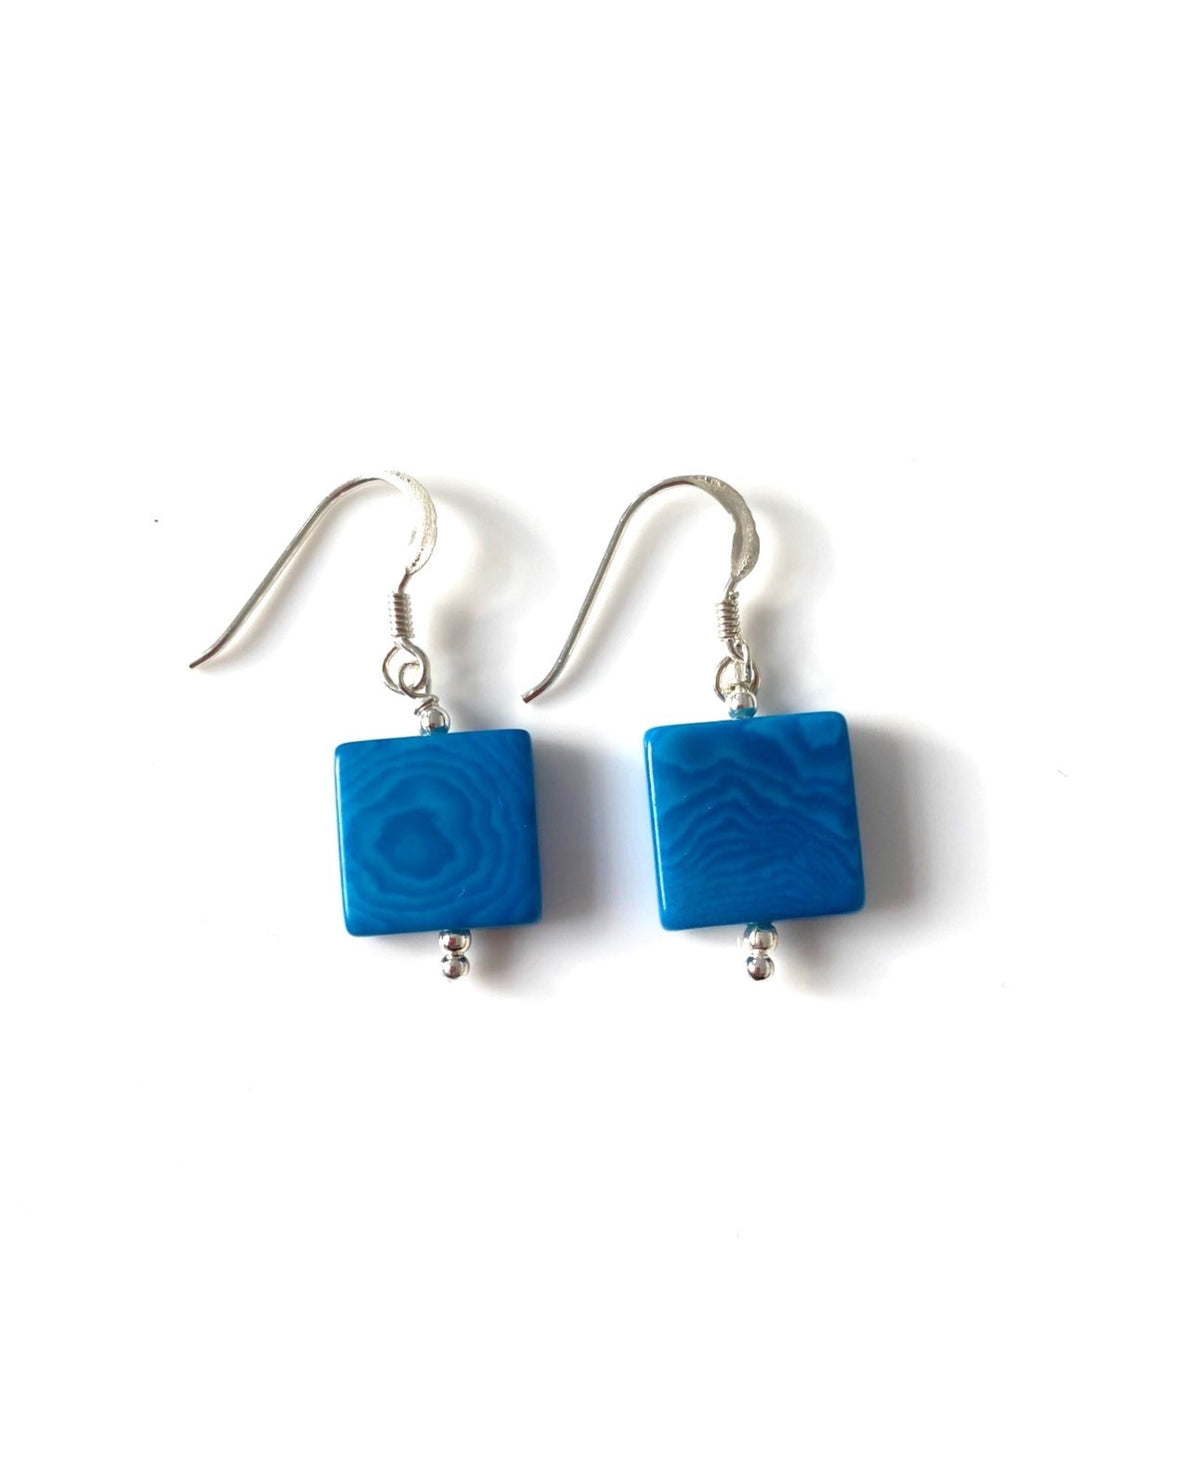 Cuadritos earrings (11mm) - Turquoise